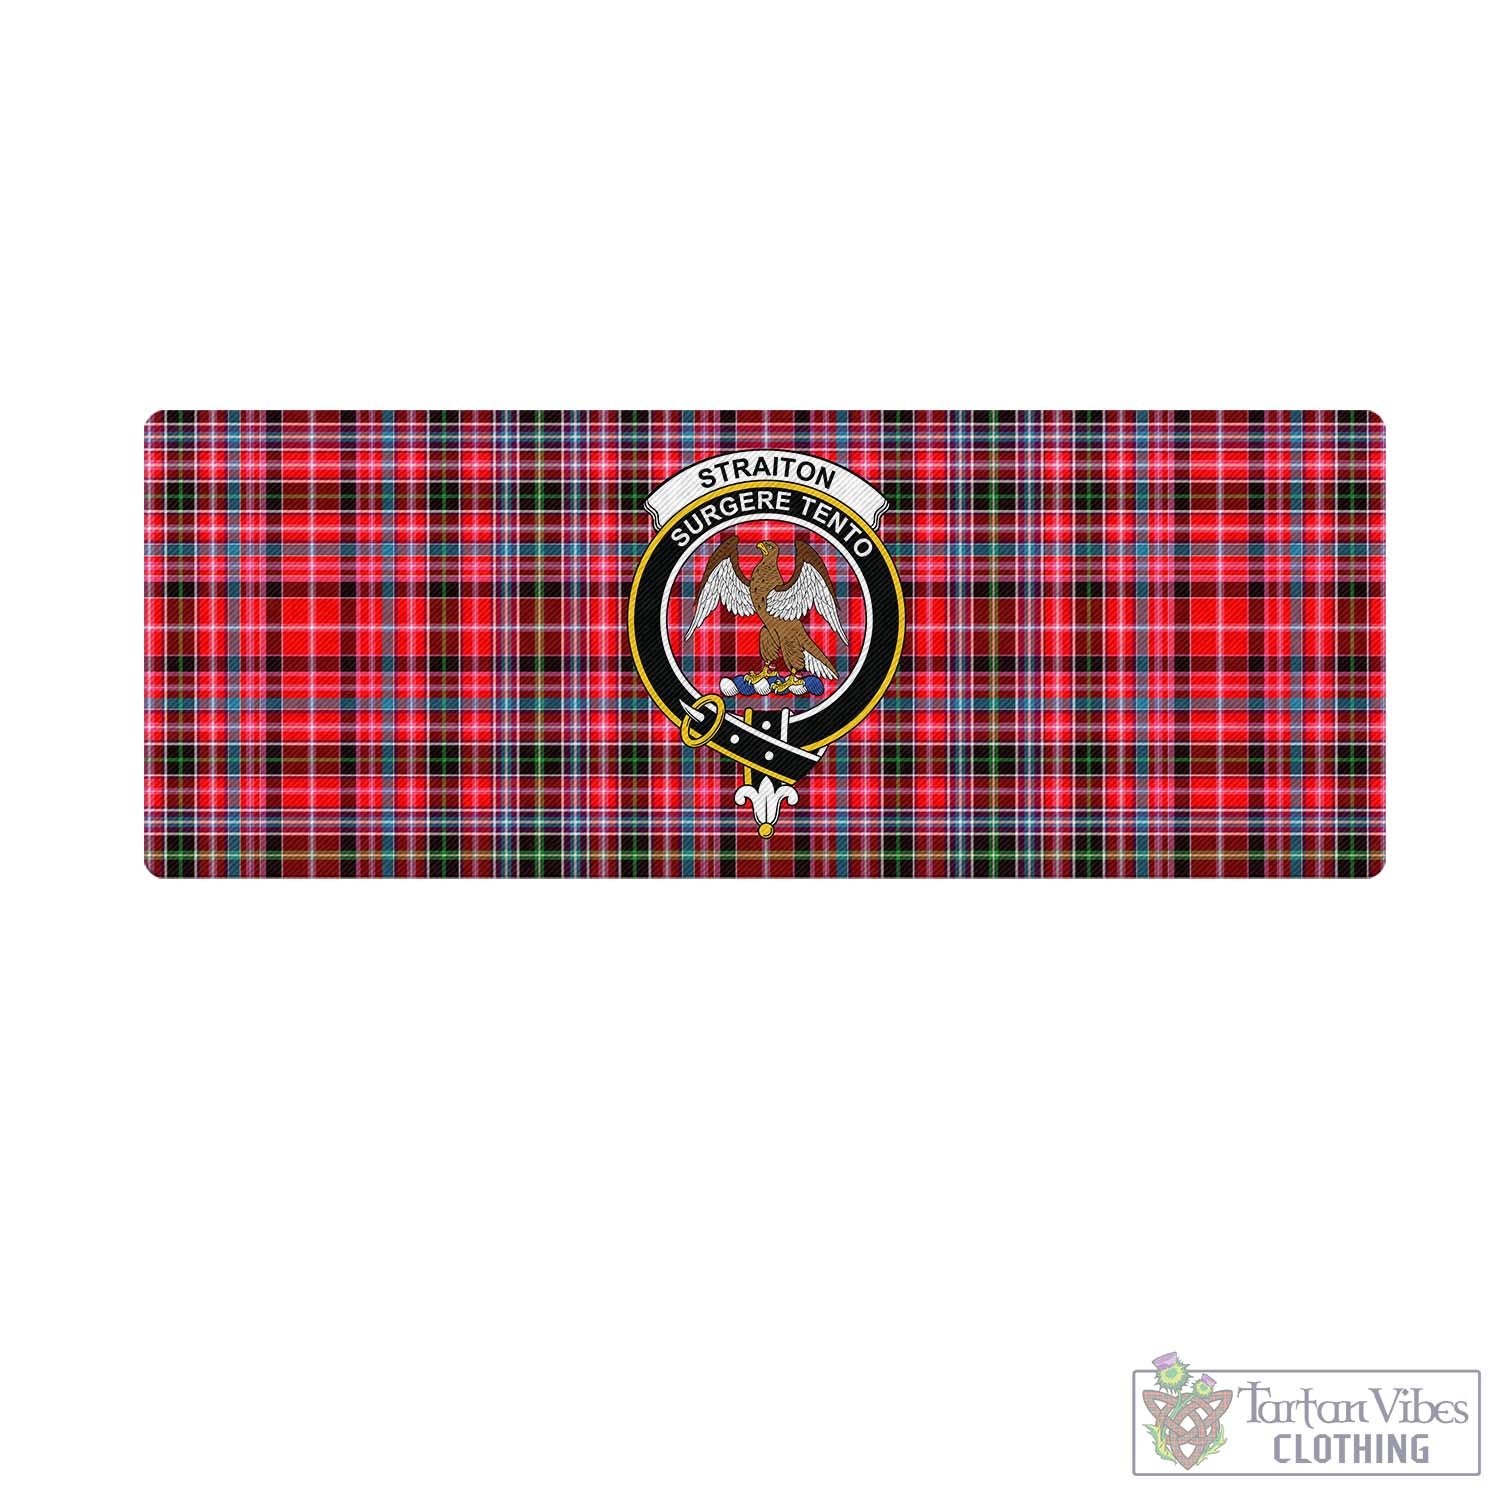 Tartan Vibes Clothing Straiton Tartan Mouse Pad with Family Crest